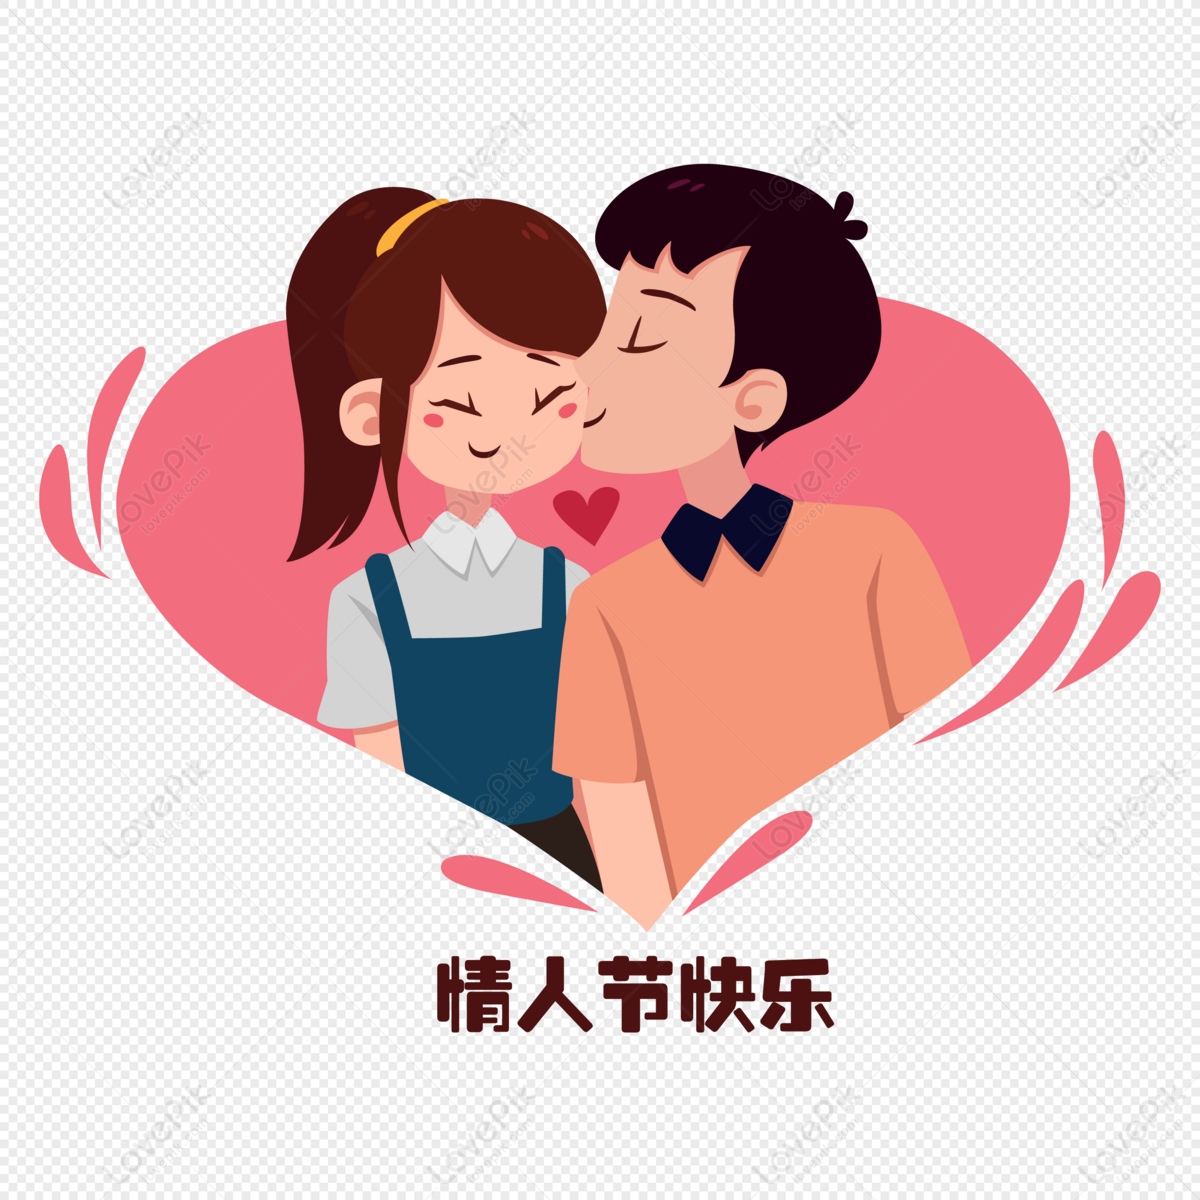 Happy Valentines Day With Loving Kisses PNG Hd Transparent Image And  Clipart Image For Free Download - Lovepik | 400942344